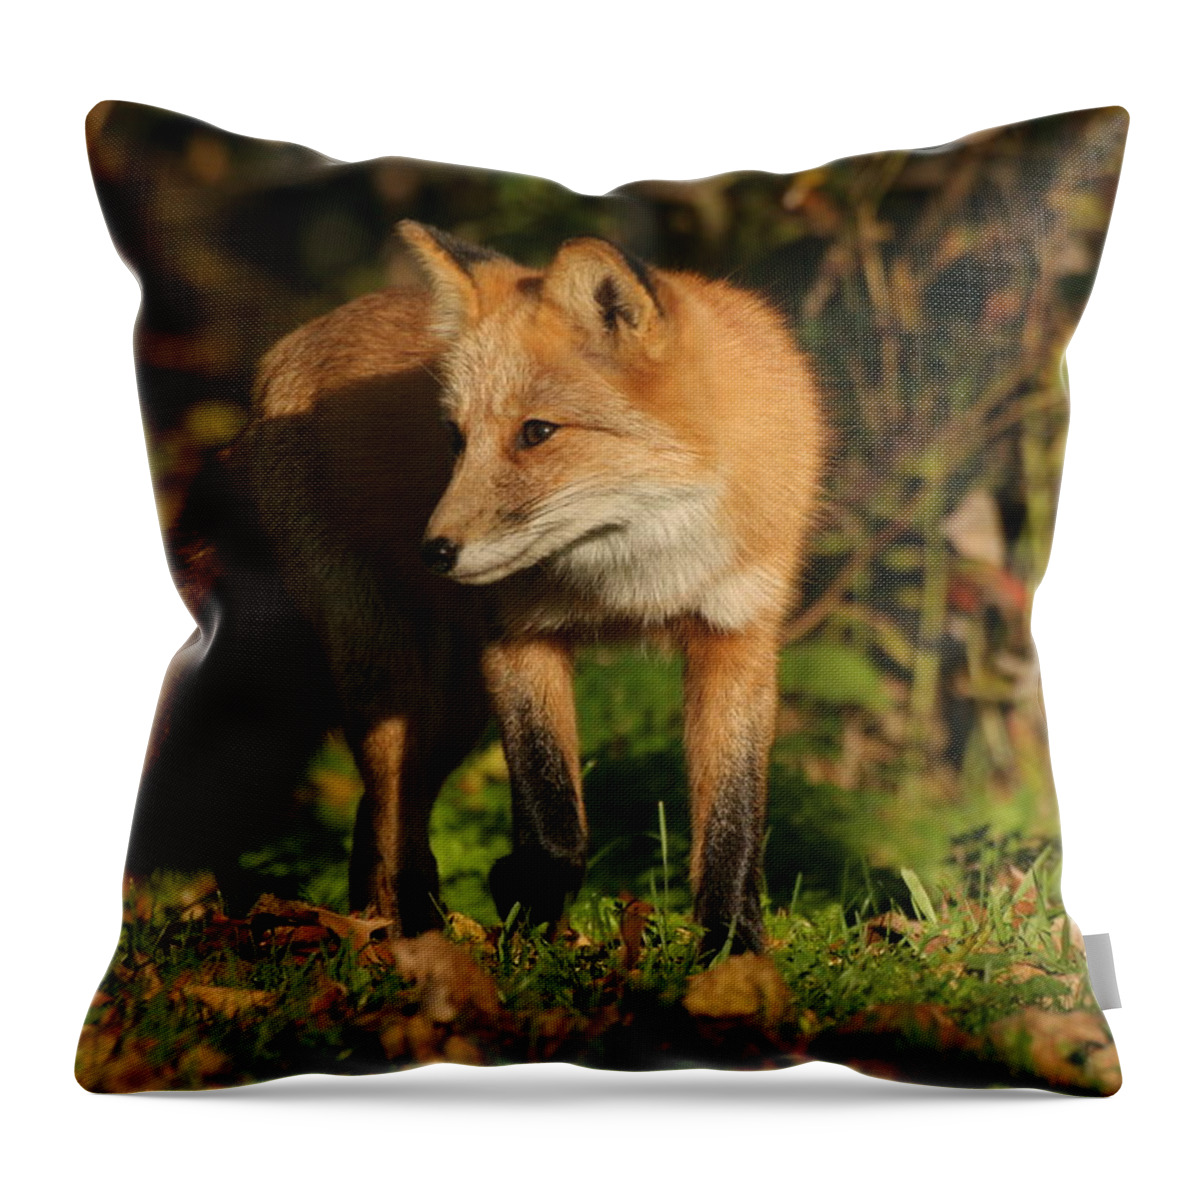 Red Fox Throw Pillow featuring the photograph Red Fox by Doris Potter